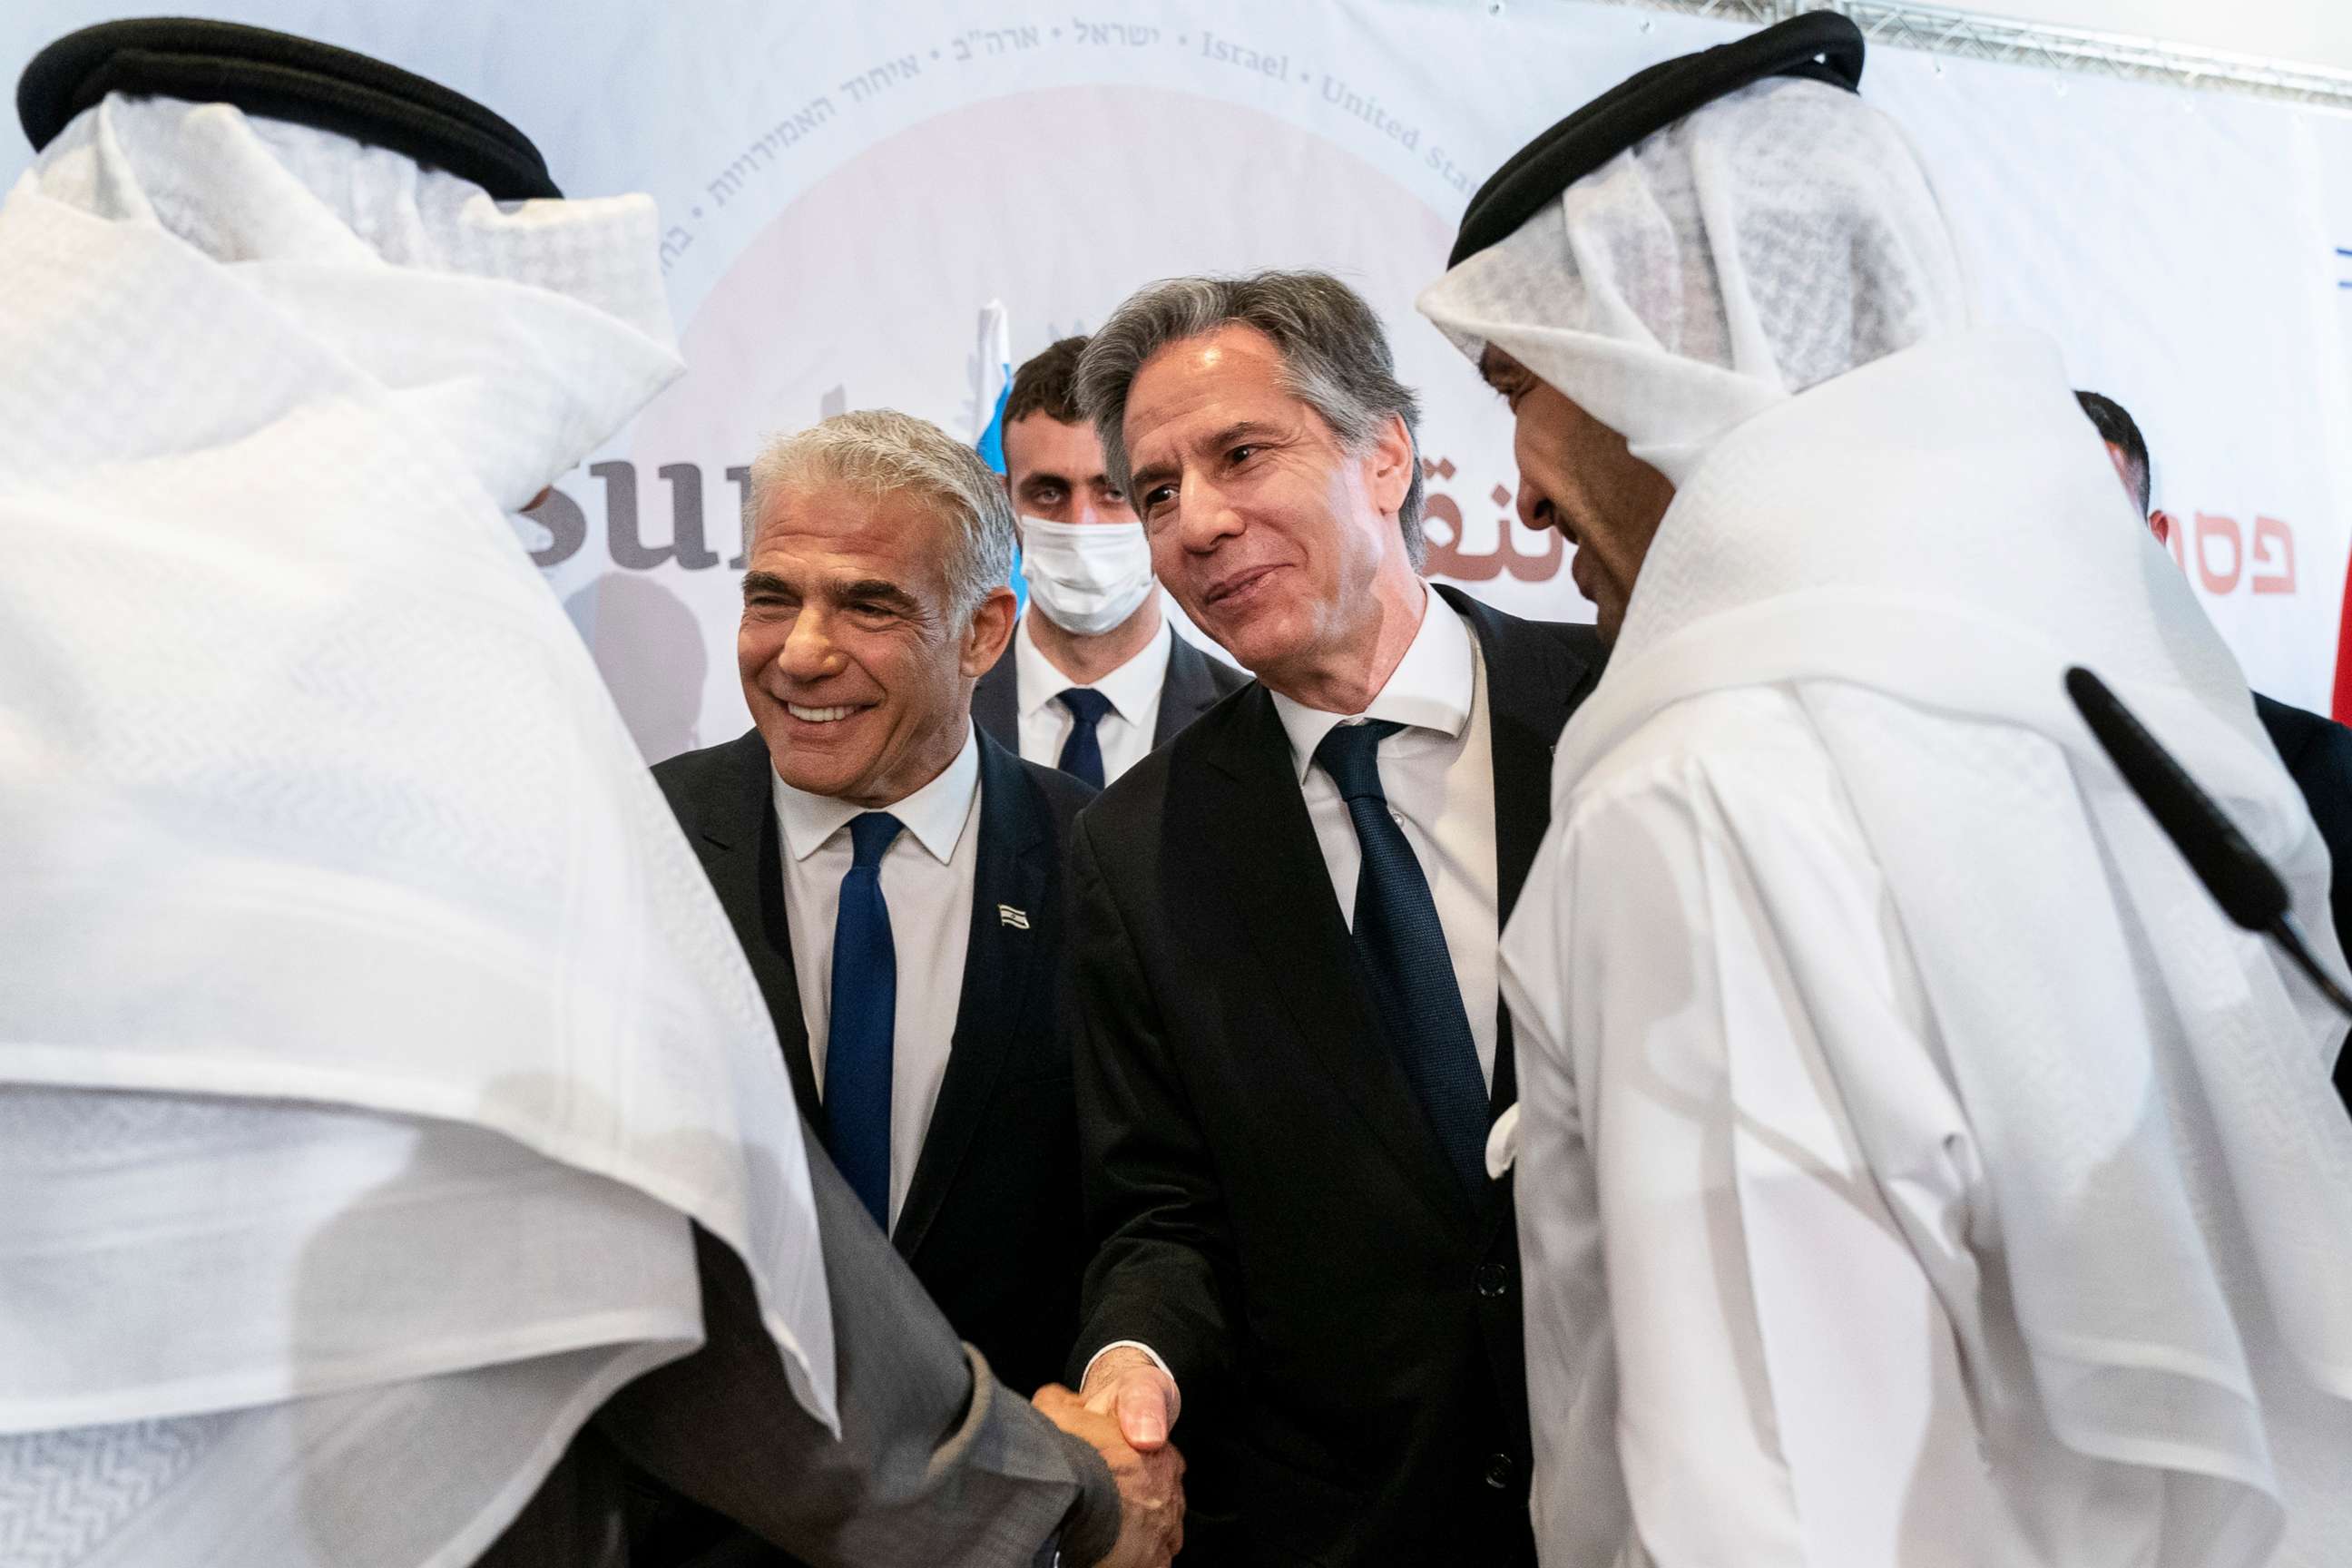 PHOTO: Yair Lapid, center left, and Antony Blinken, shake hands with Abdullatif bin Rashid al-Zayani, front left, and United Arab Emirates' Foreign Minister Sheikh Abdullah bin Zayed Al Nahyan, front right, March 28, 2022, in Sde Boker, Israel.